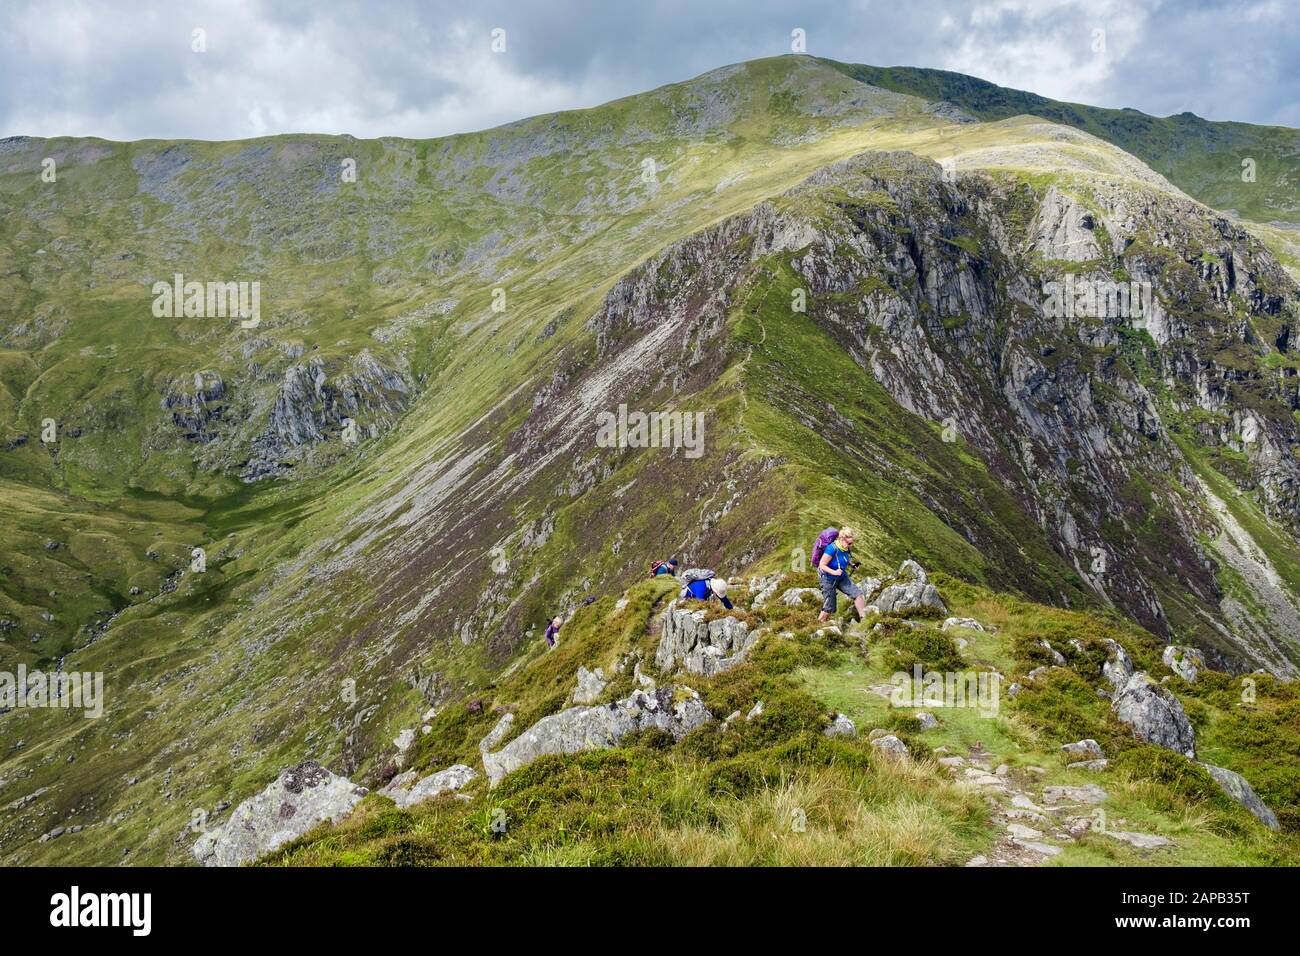 Hikers hiking on path from Carnedd Llewelyn to Pen yr Helgi Du in Carneddau mountains of Snowdonia National Park. Ogwen, North Wales, UK, Britain Stock Photo